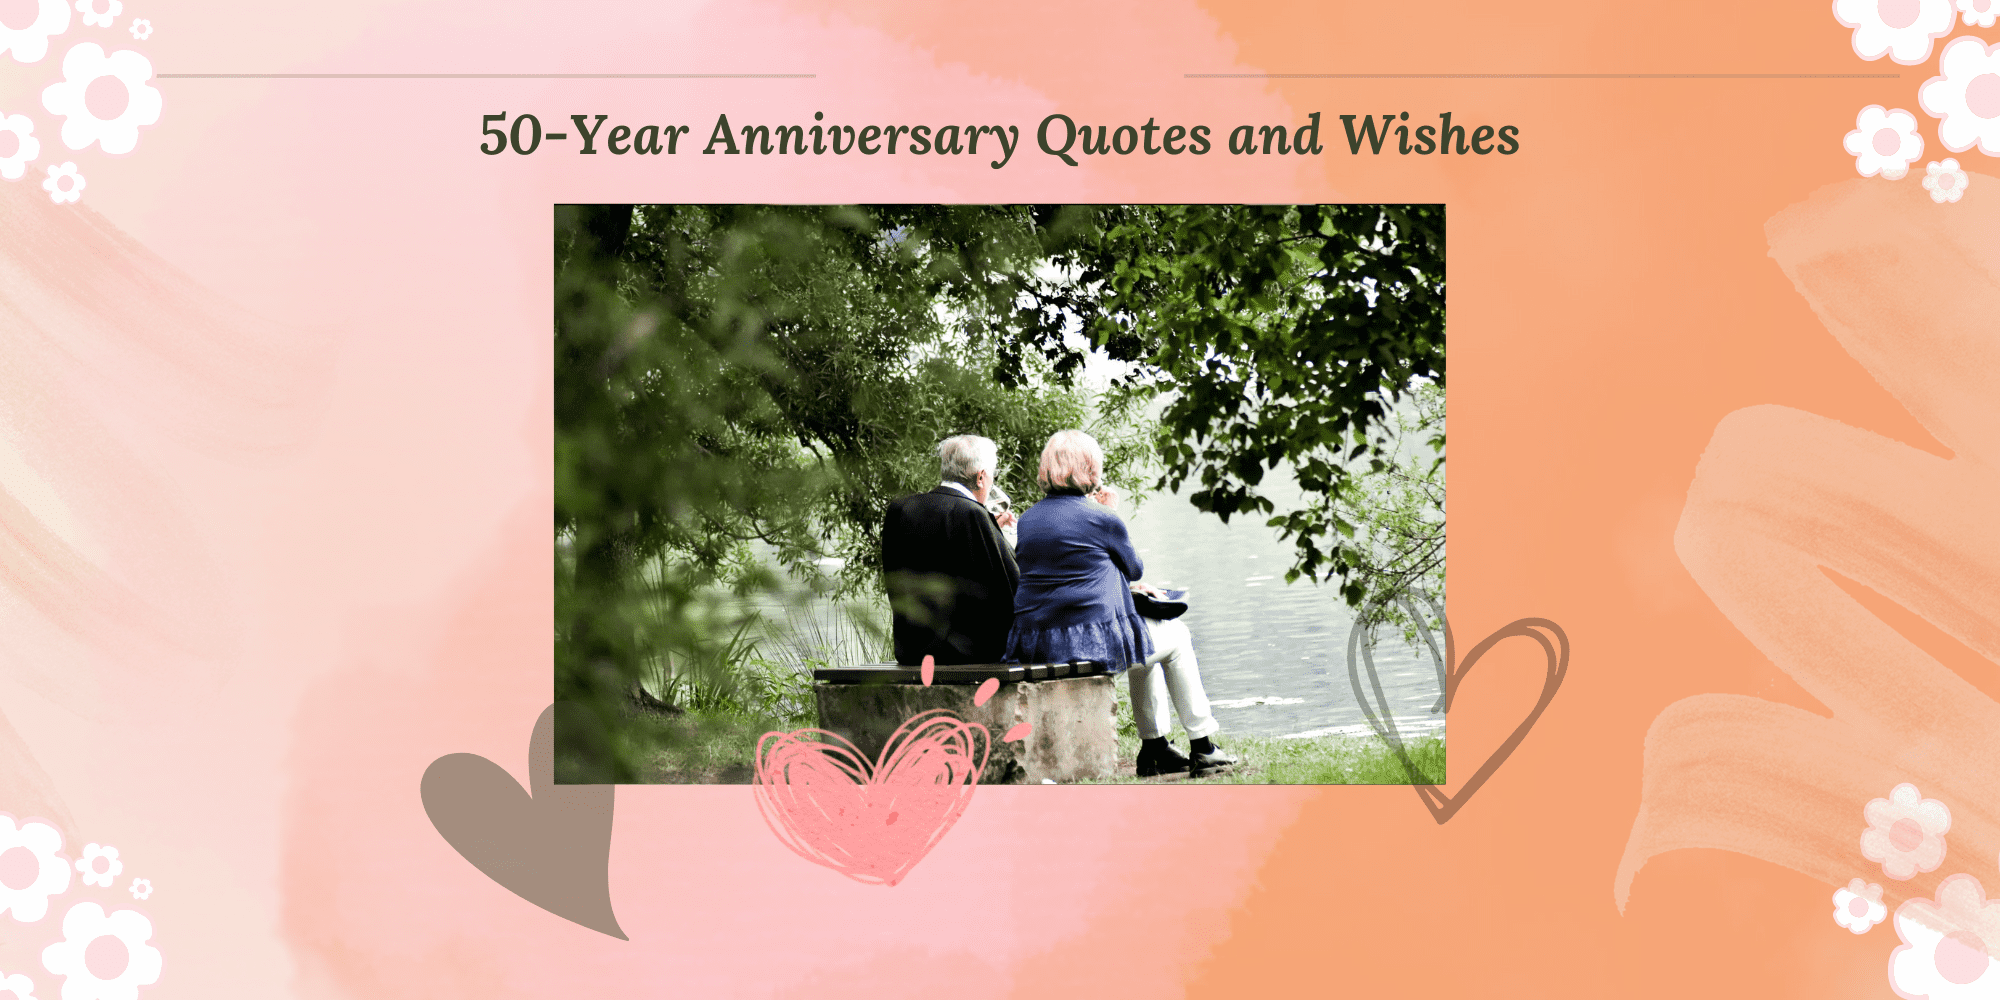 Heart-melting 50th Anniversary Quotes, Wishes And Messages For Everyone